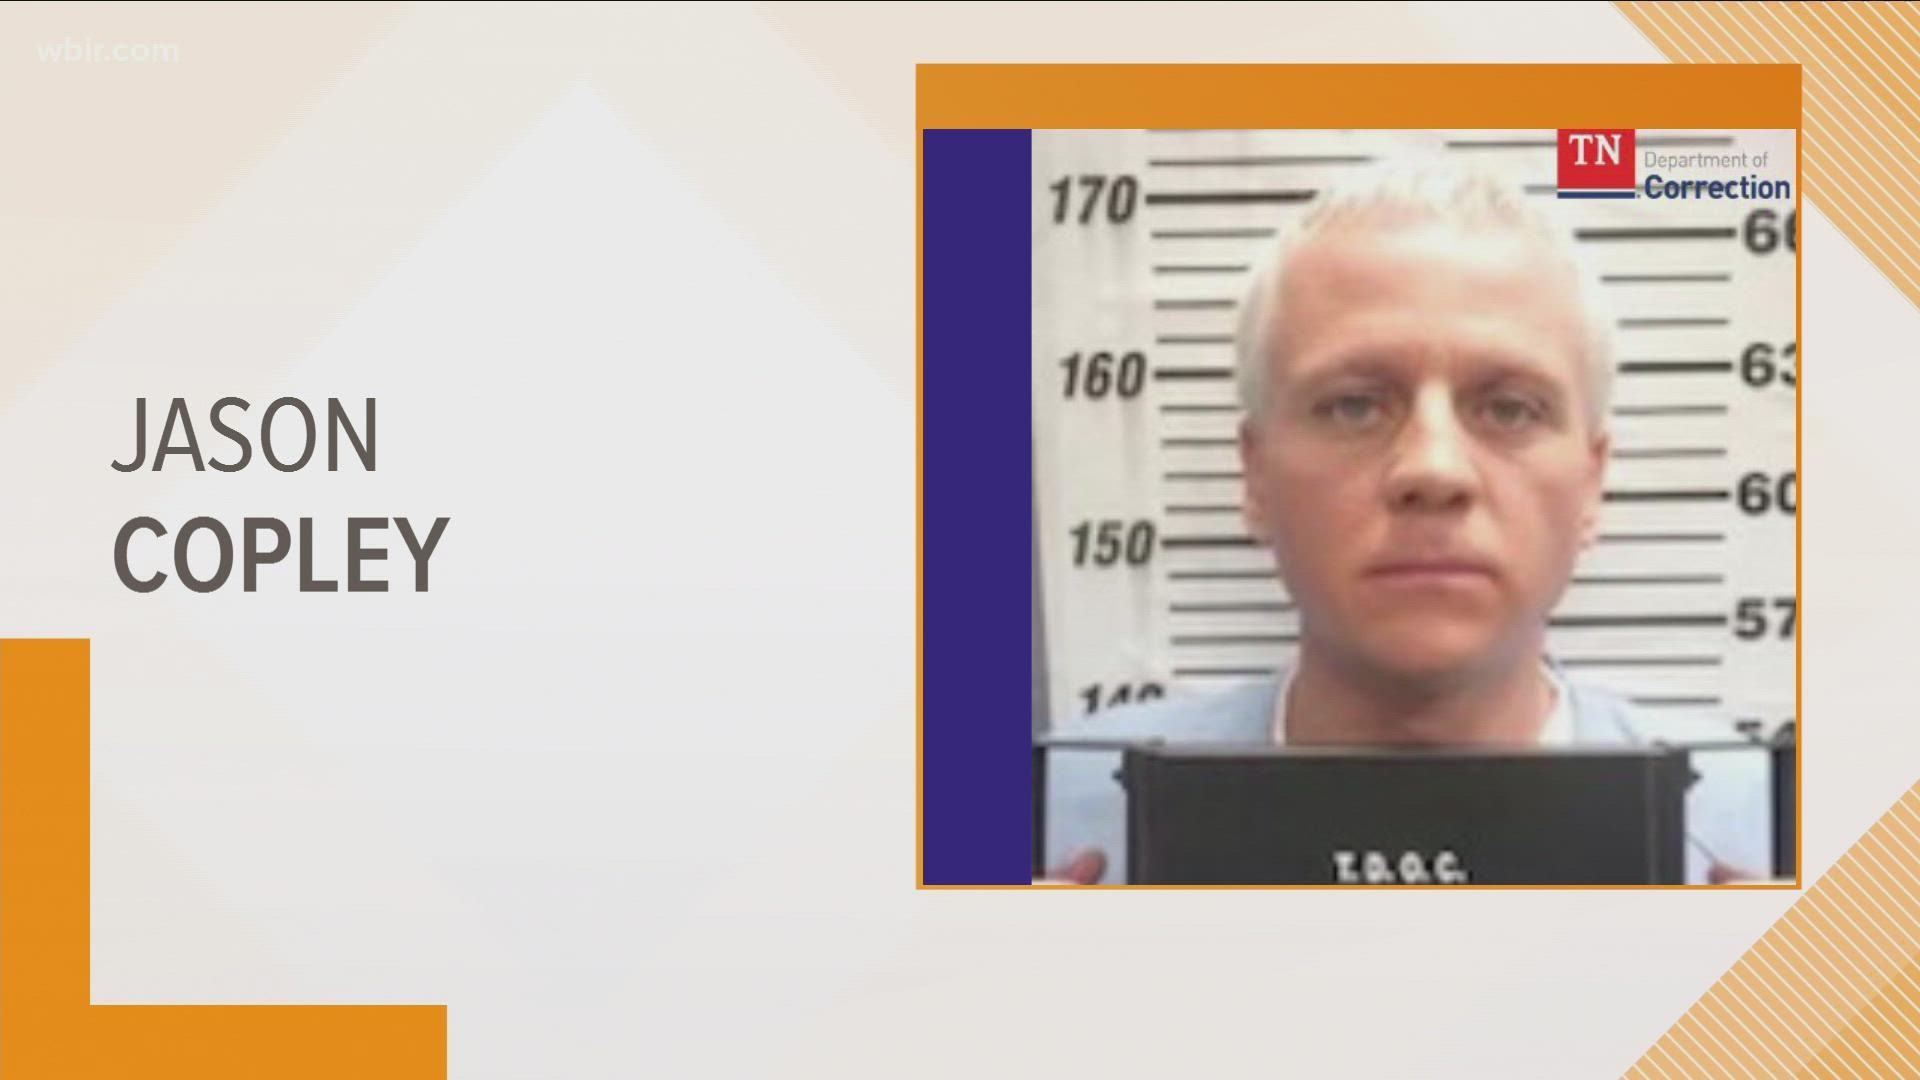 Jason Copley escaped from a work detail at the Morgan County Correctical Facility.